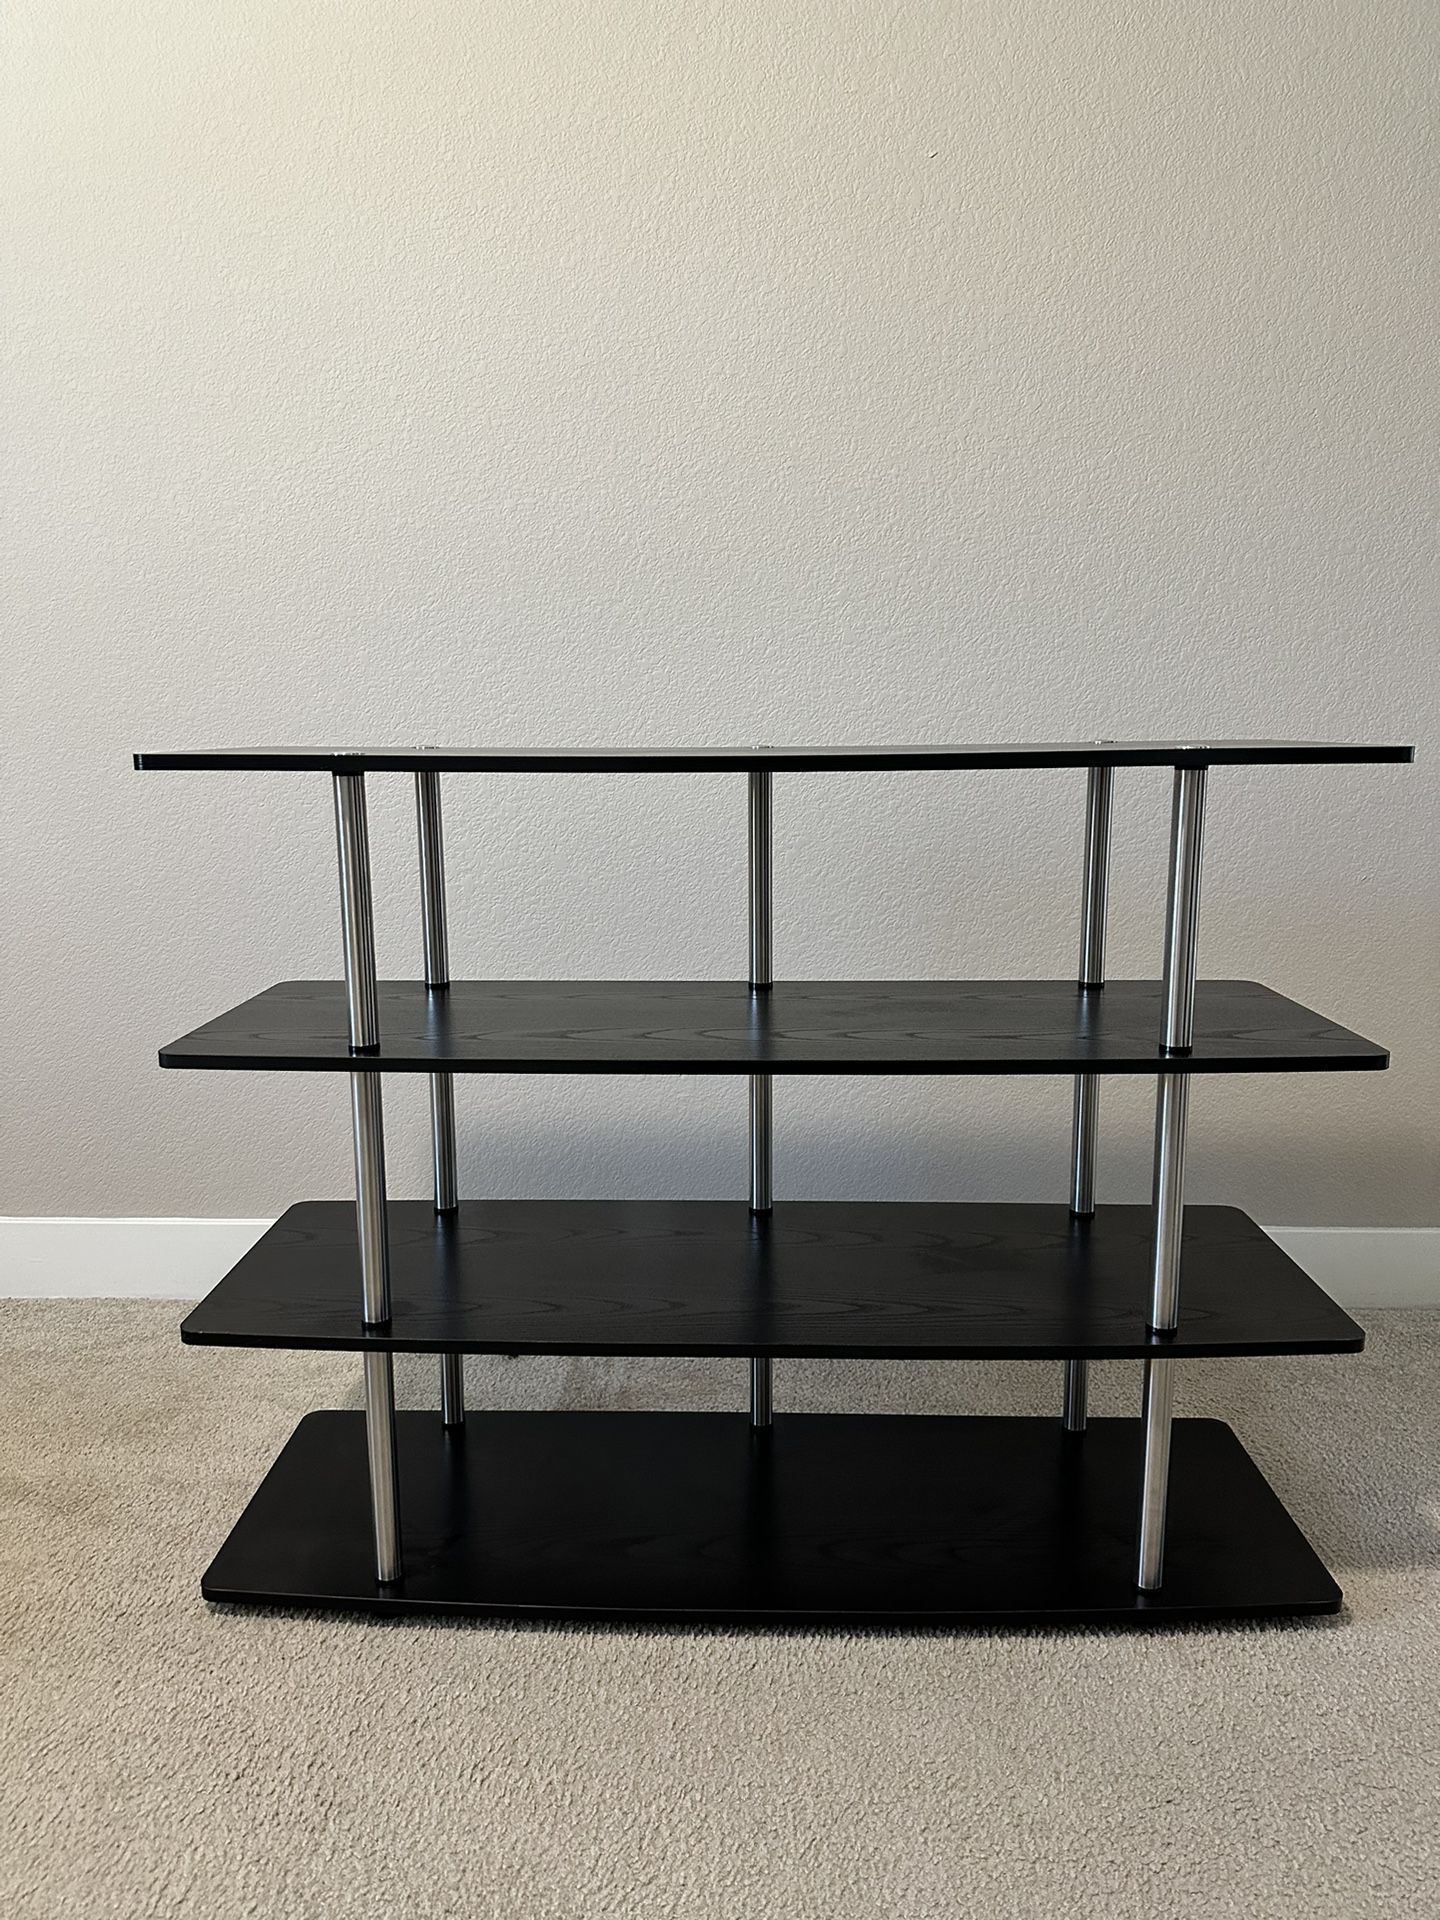 TERRIFIC TV STAND - Convenience Concepts TV Stand